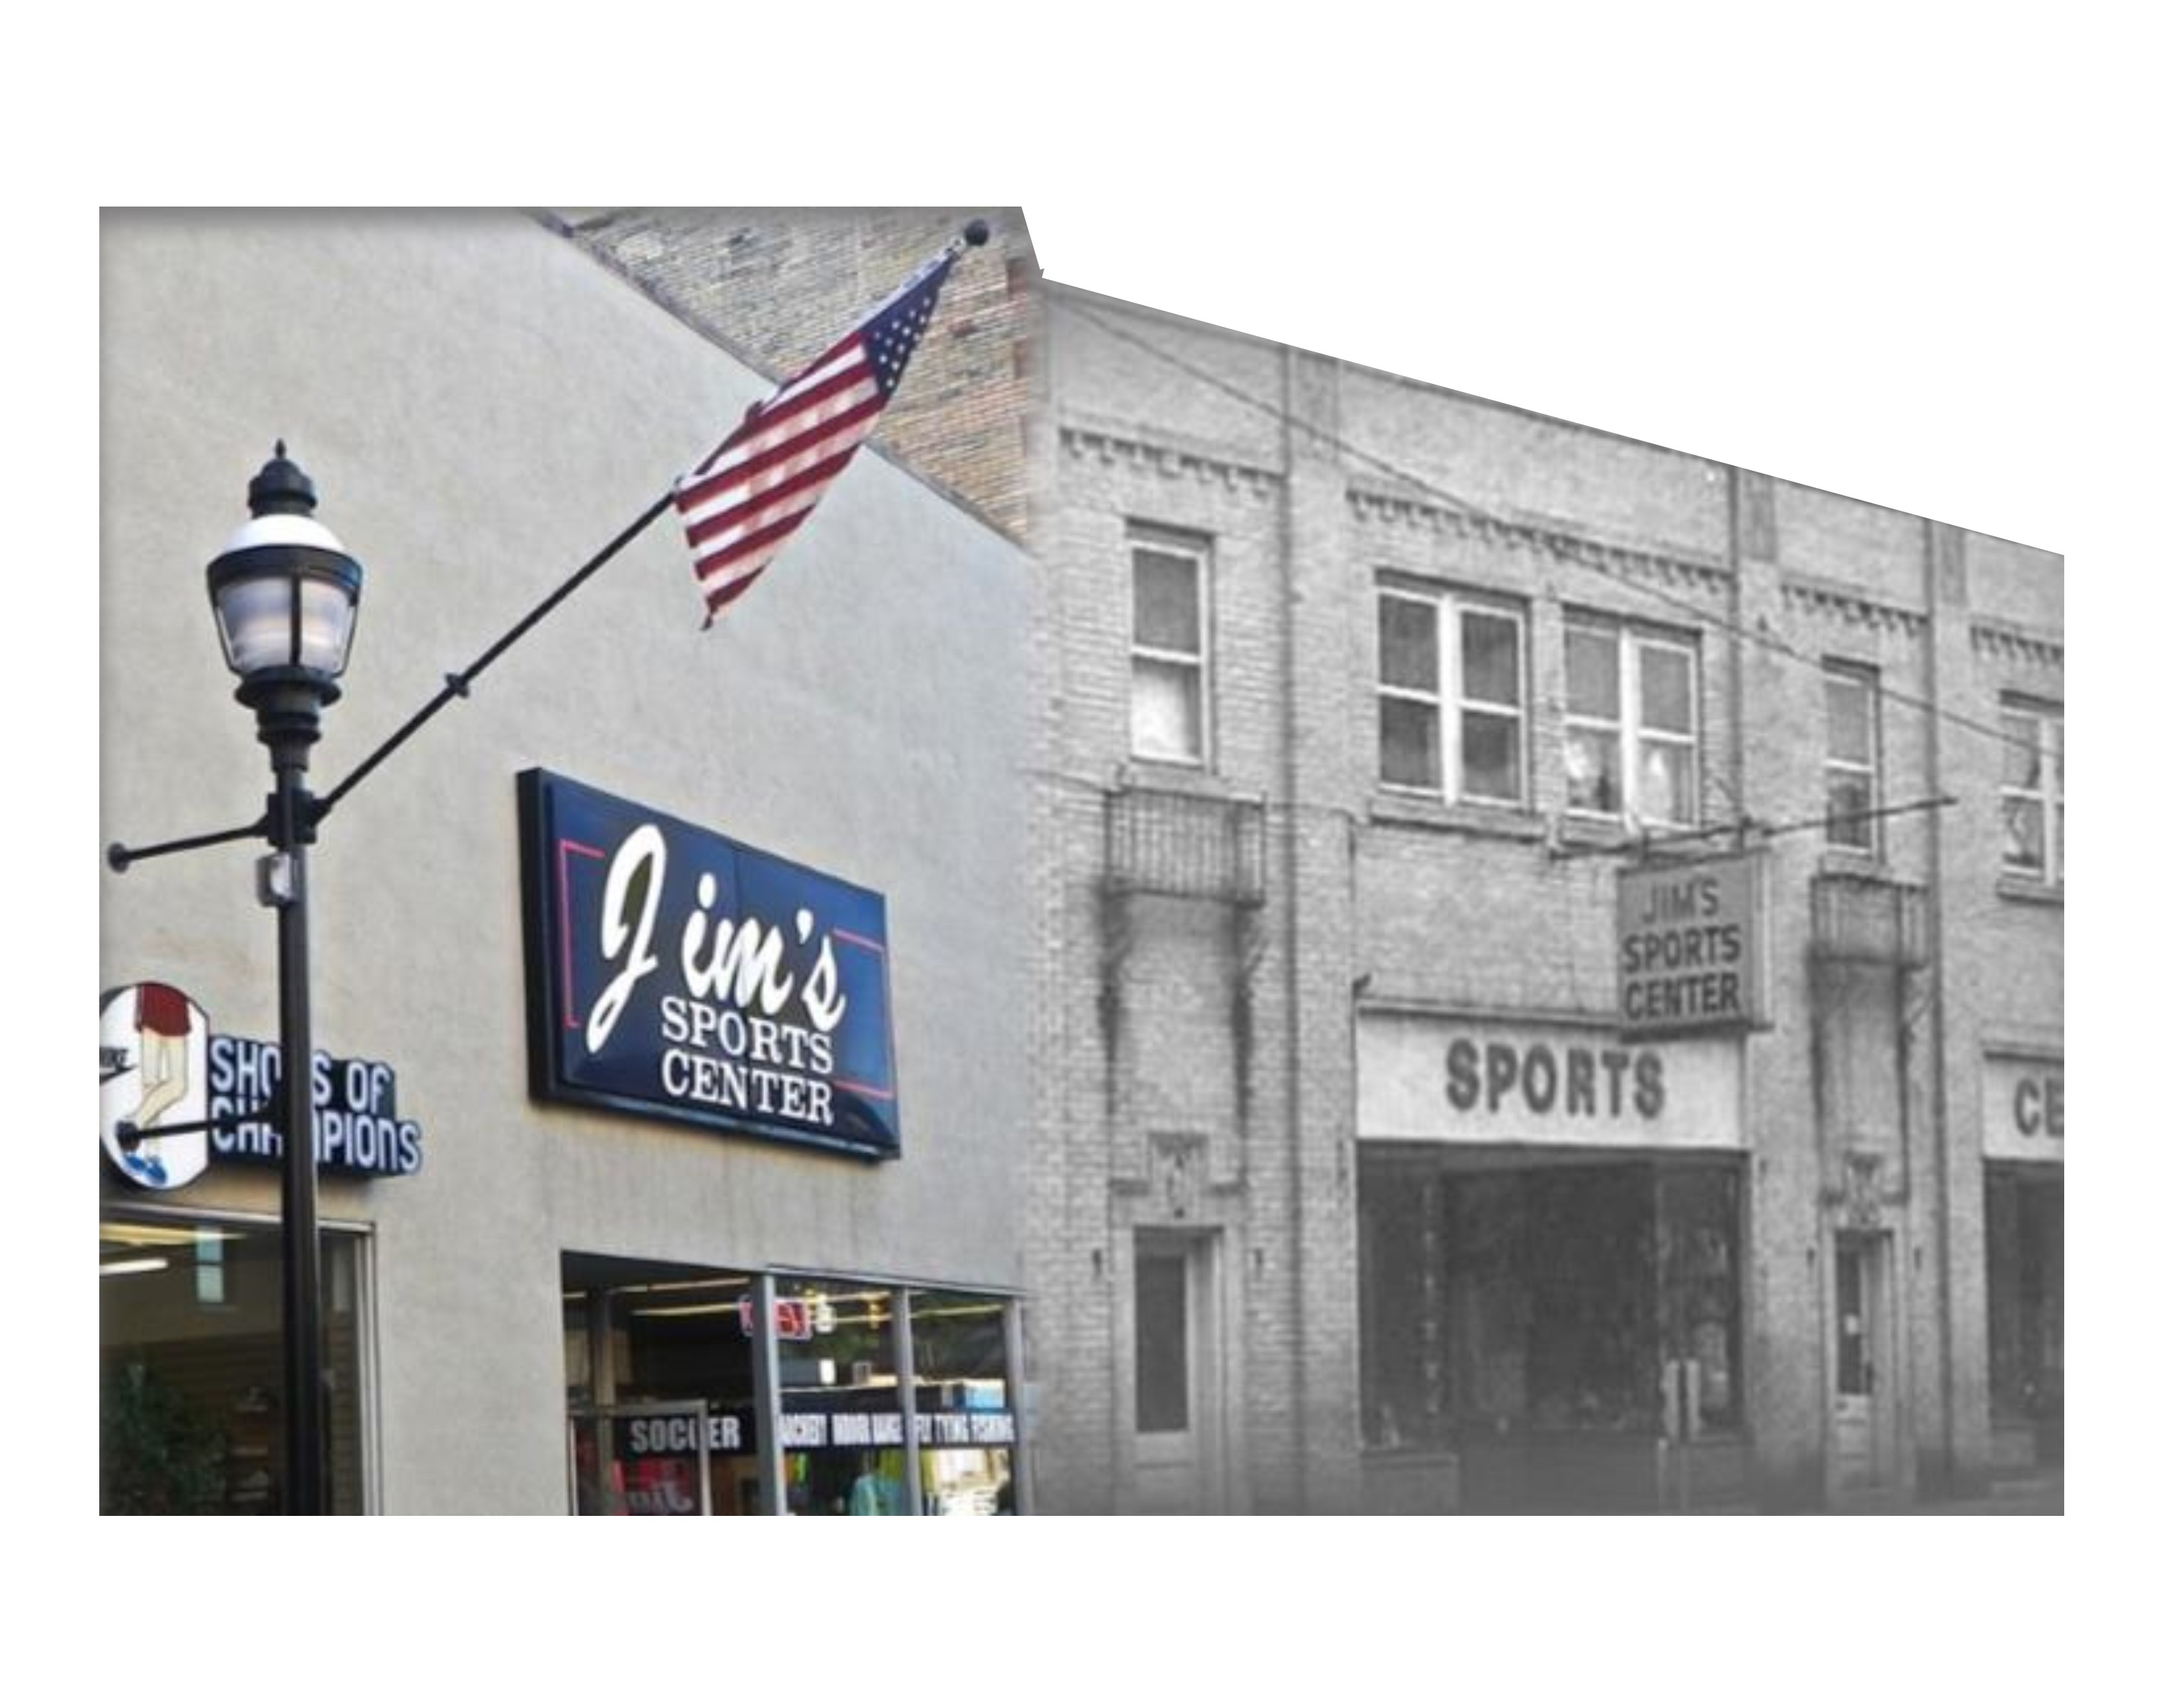 Pictured left is Jim's Sports Center of Clearfield, at their present location. On the right, is the original "Jim's Sports Center" which was founded in 1970 by Jim Malloy. The original store was located on Third Street in Clearfield. The store's continued success eventually led to it's relocation to its present location at 26 N. Second Street in Clearfield. The store is still owned and operated by the Malloy family. (Photo submitted)